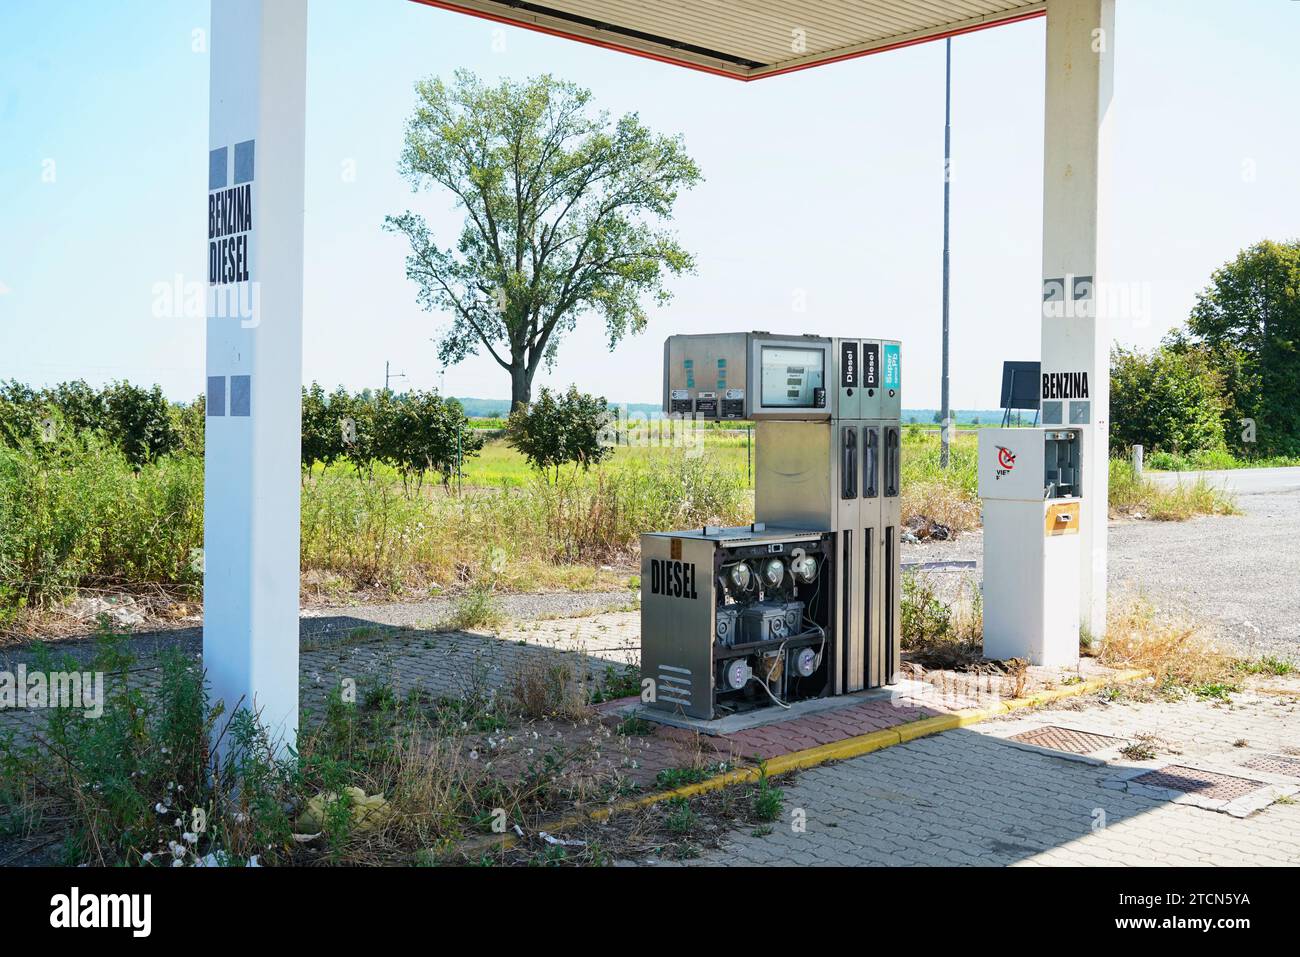 Casale / Italy - July 22, 2023: An abandoned petrol station as a symbol of the energy transition away from fossil fuels Stock Photo